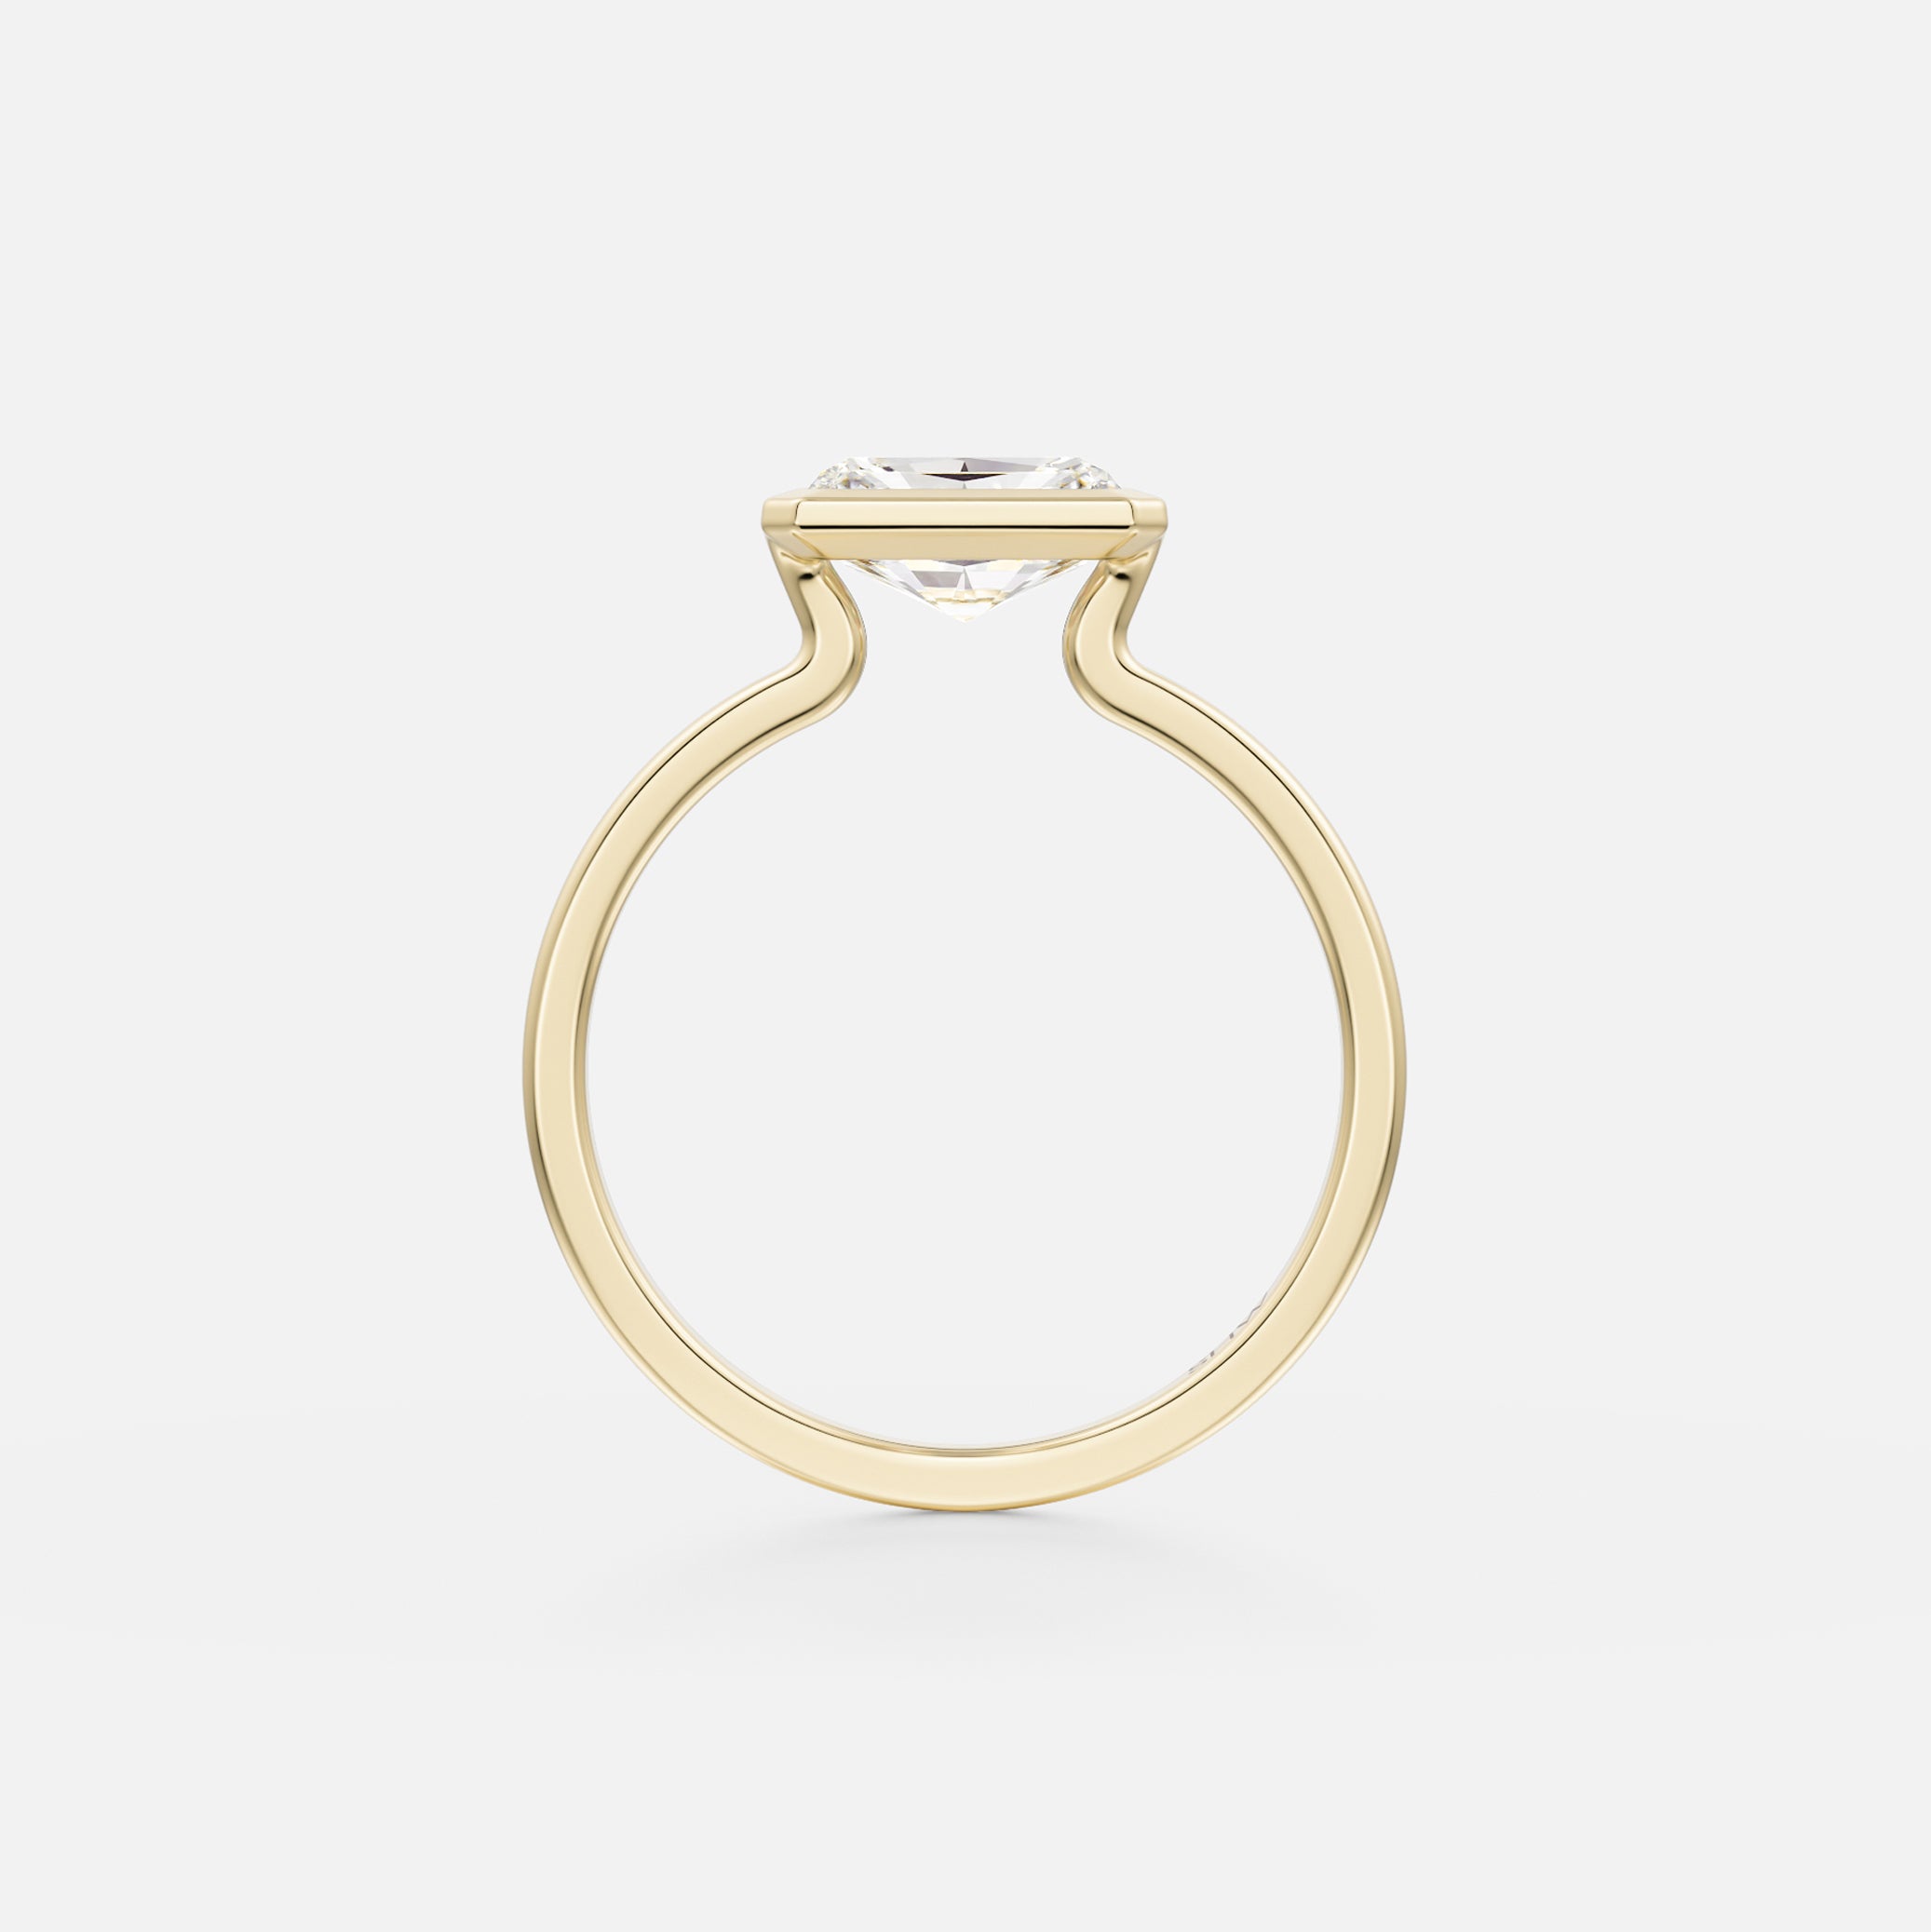 Mana Flat Band with East West Radiant Modern Engagement Ring Setting in 14 karat yellow, white or rose Gold or platinum by SHW Fine Jewelry NYC